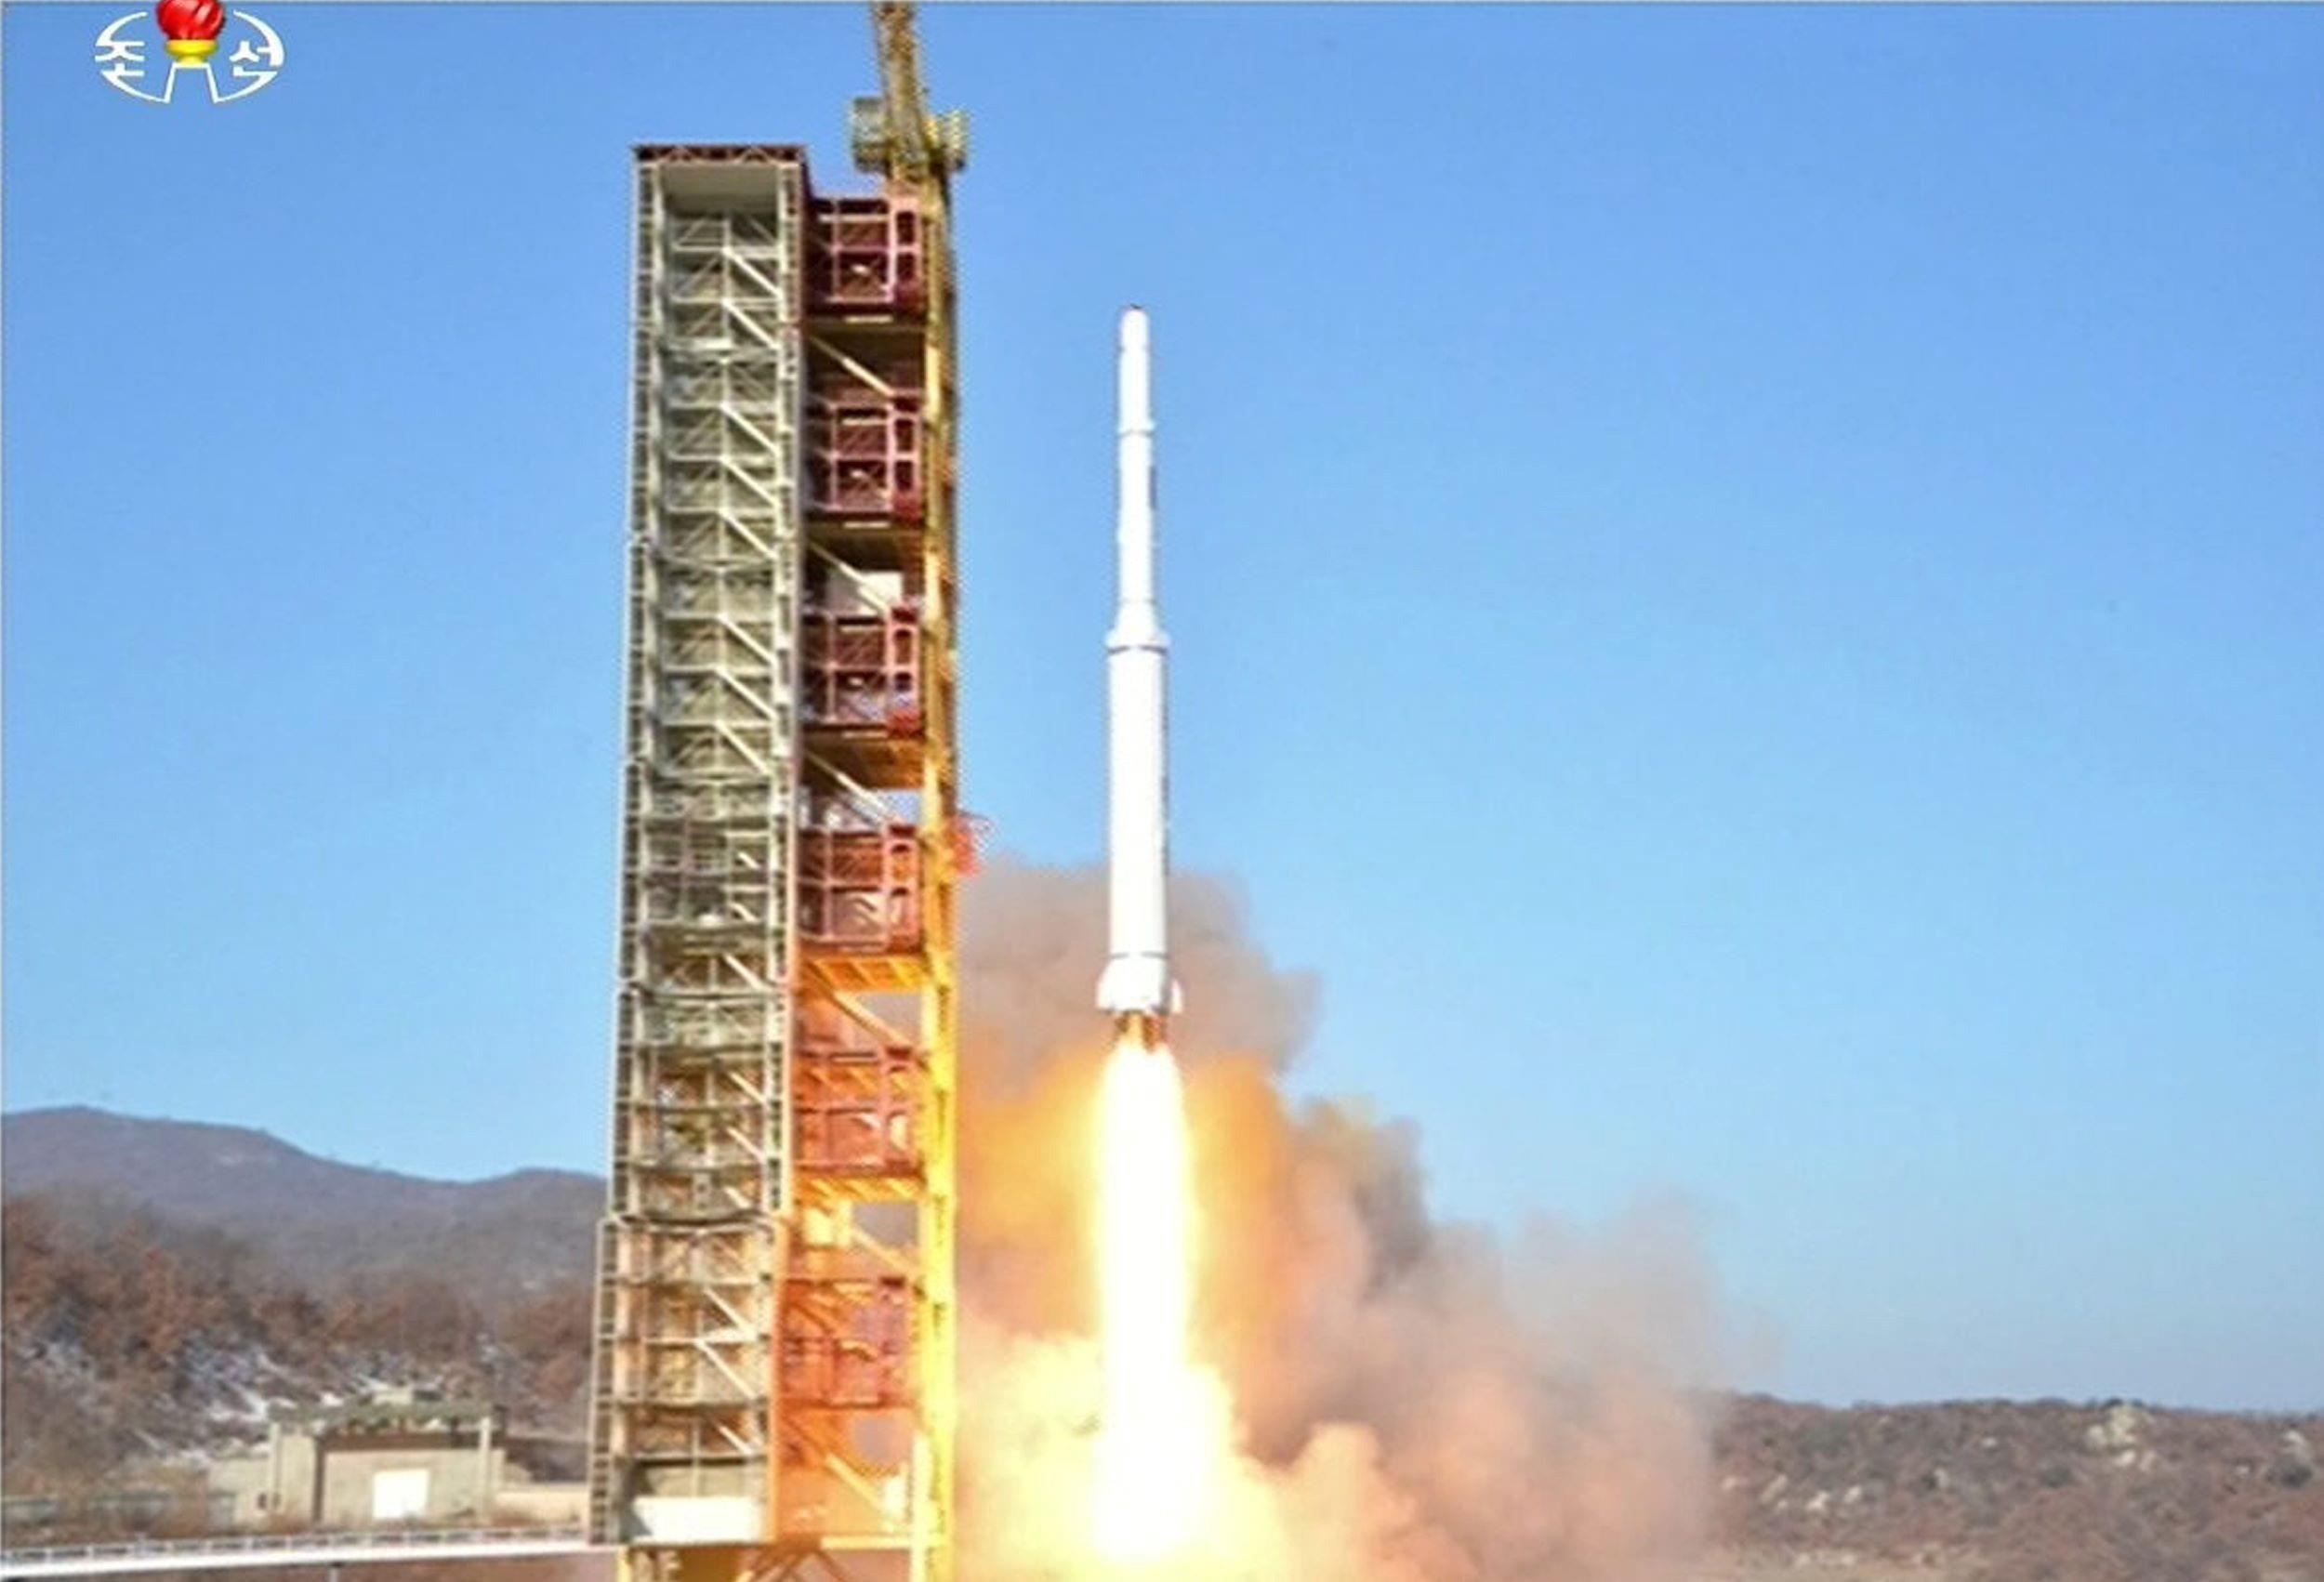 A North Korean rocket lifts off from its launchpad in Dongchang-ri Sunday morning